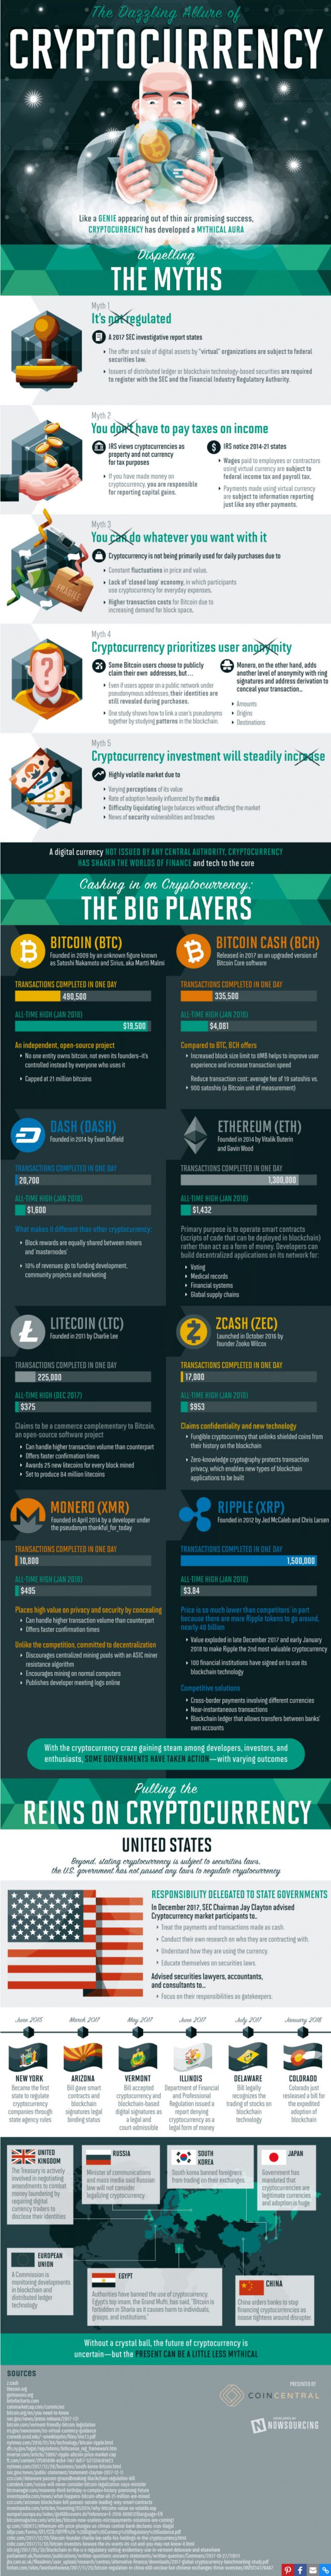 Cryptocurrency Infographic